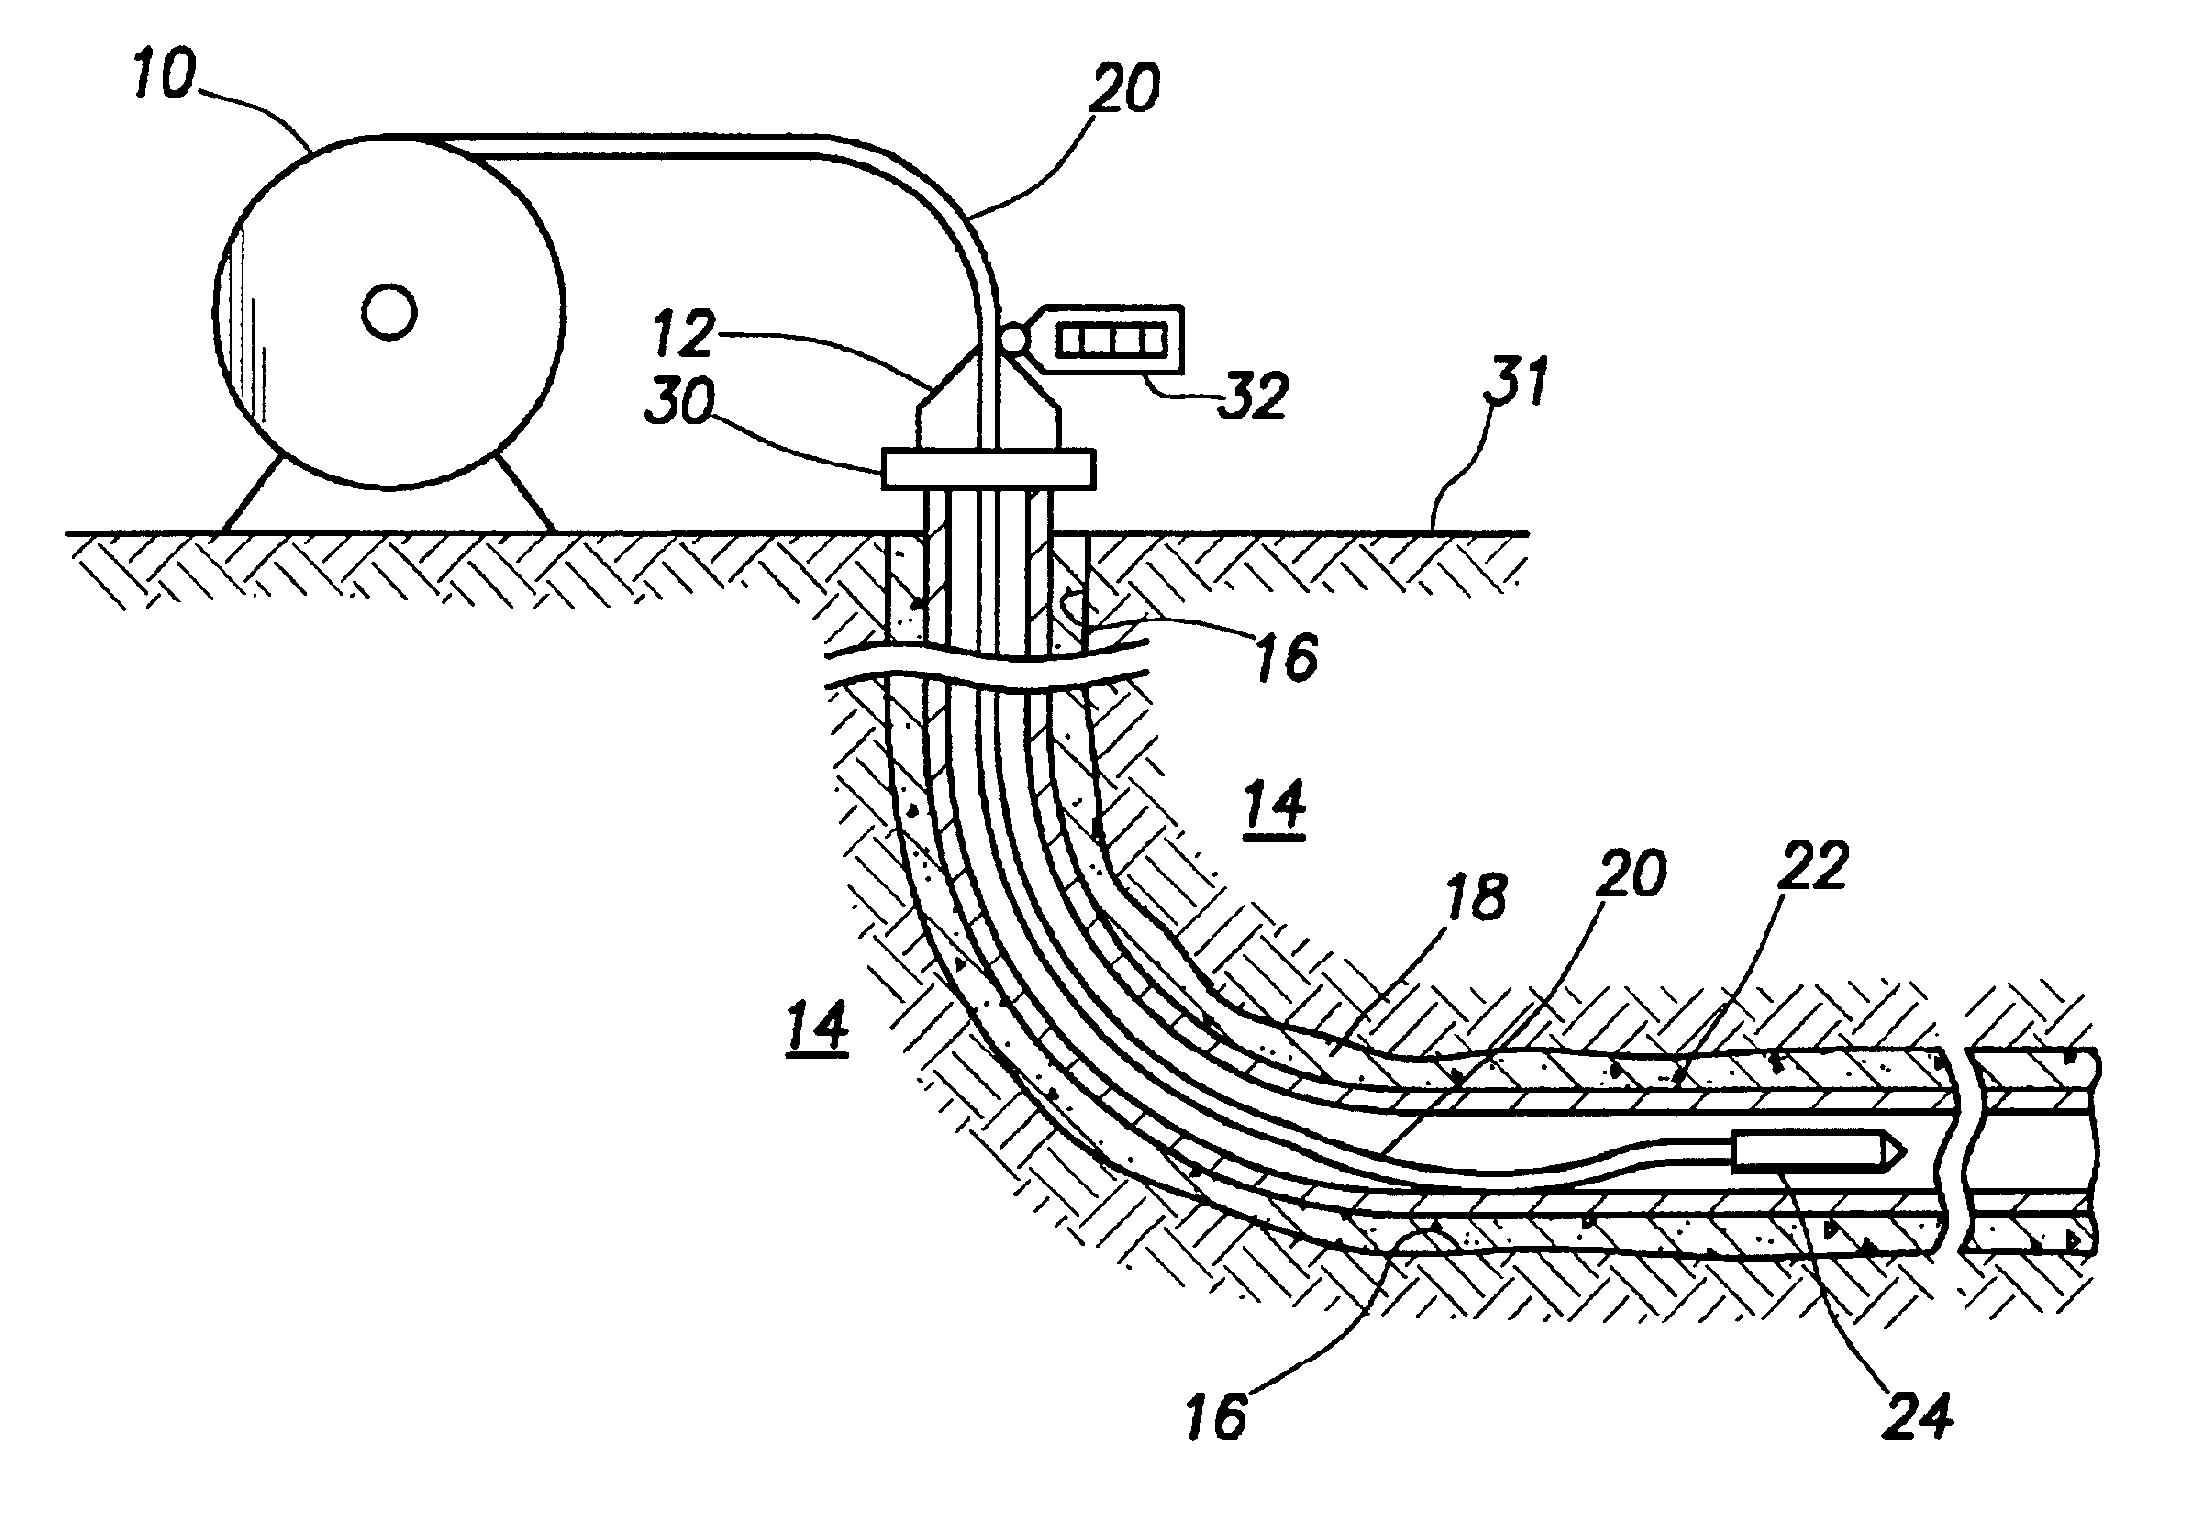 Apparatus and methods for conveying instrumentation within a borehole using continuous sucker rod